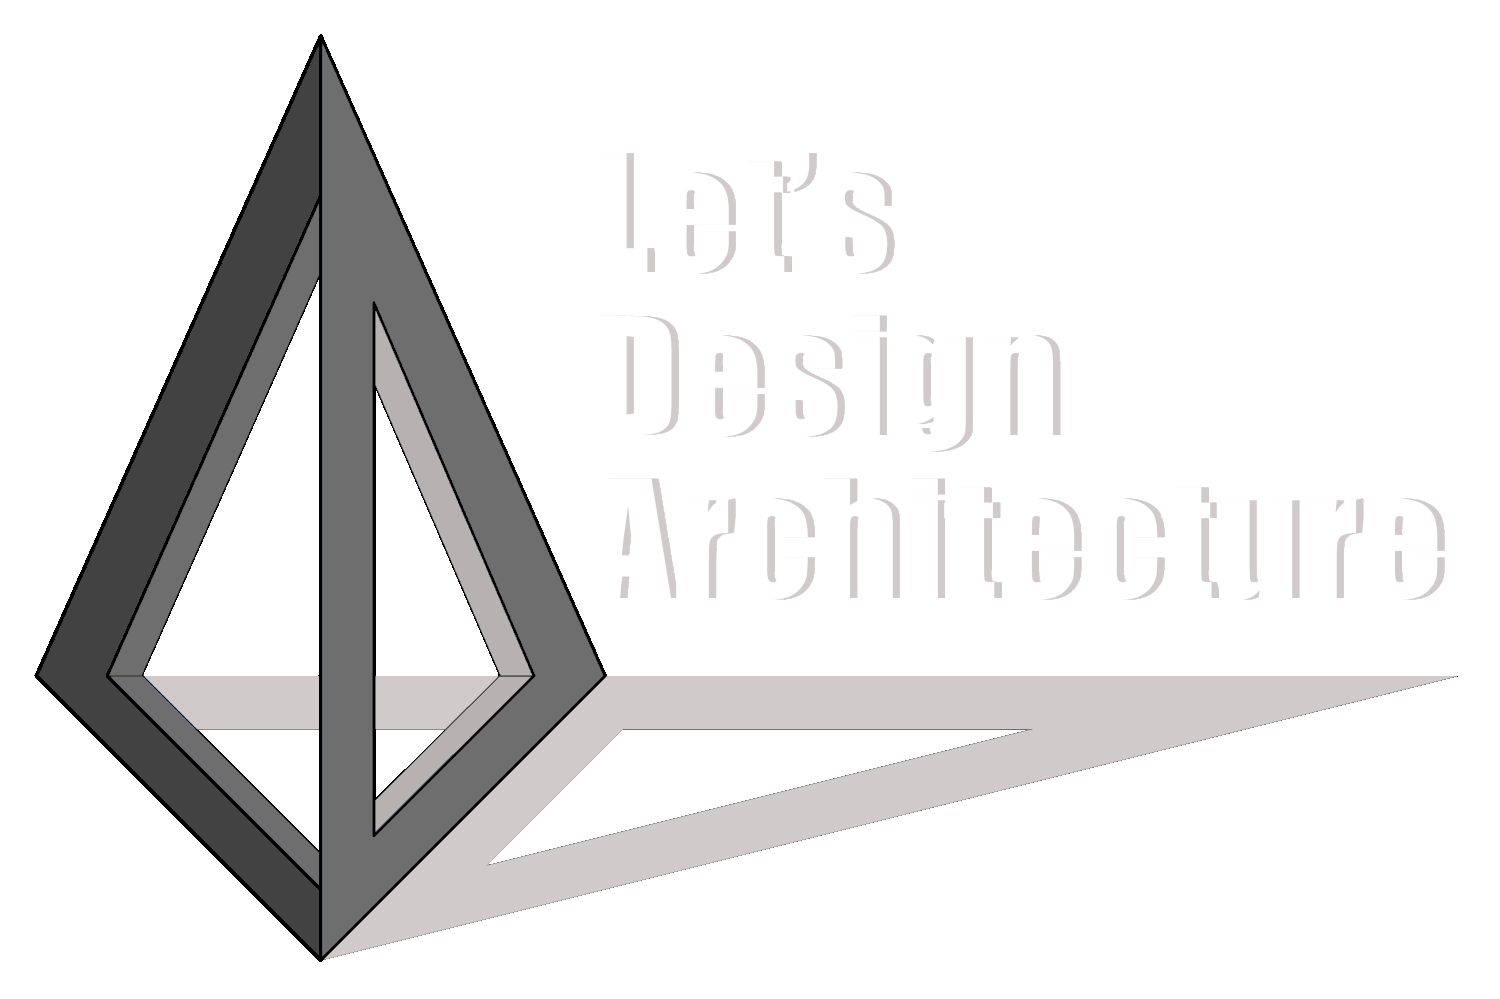 Let's Design Architecture Limited - Architectural Design Services based near Stowmarket, Suffolk